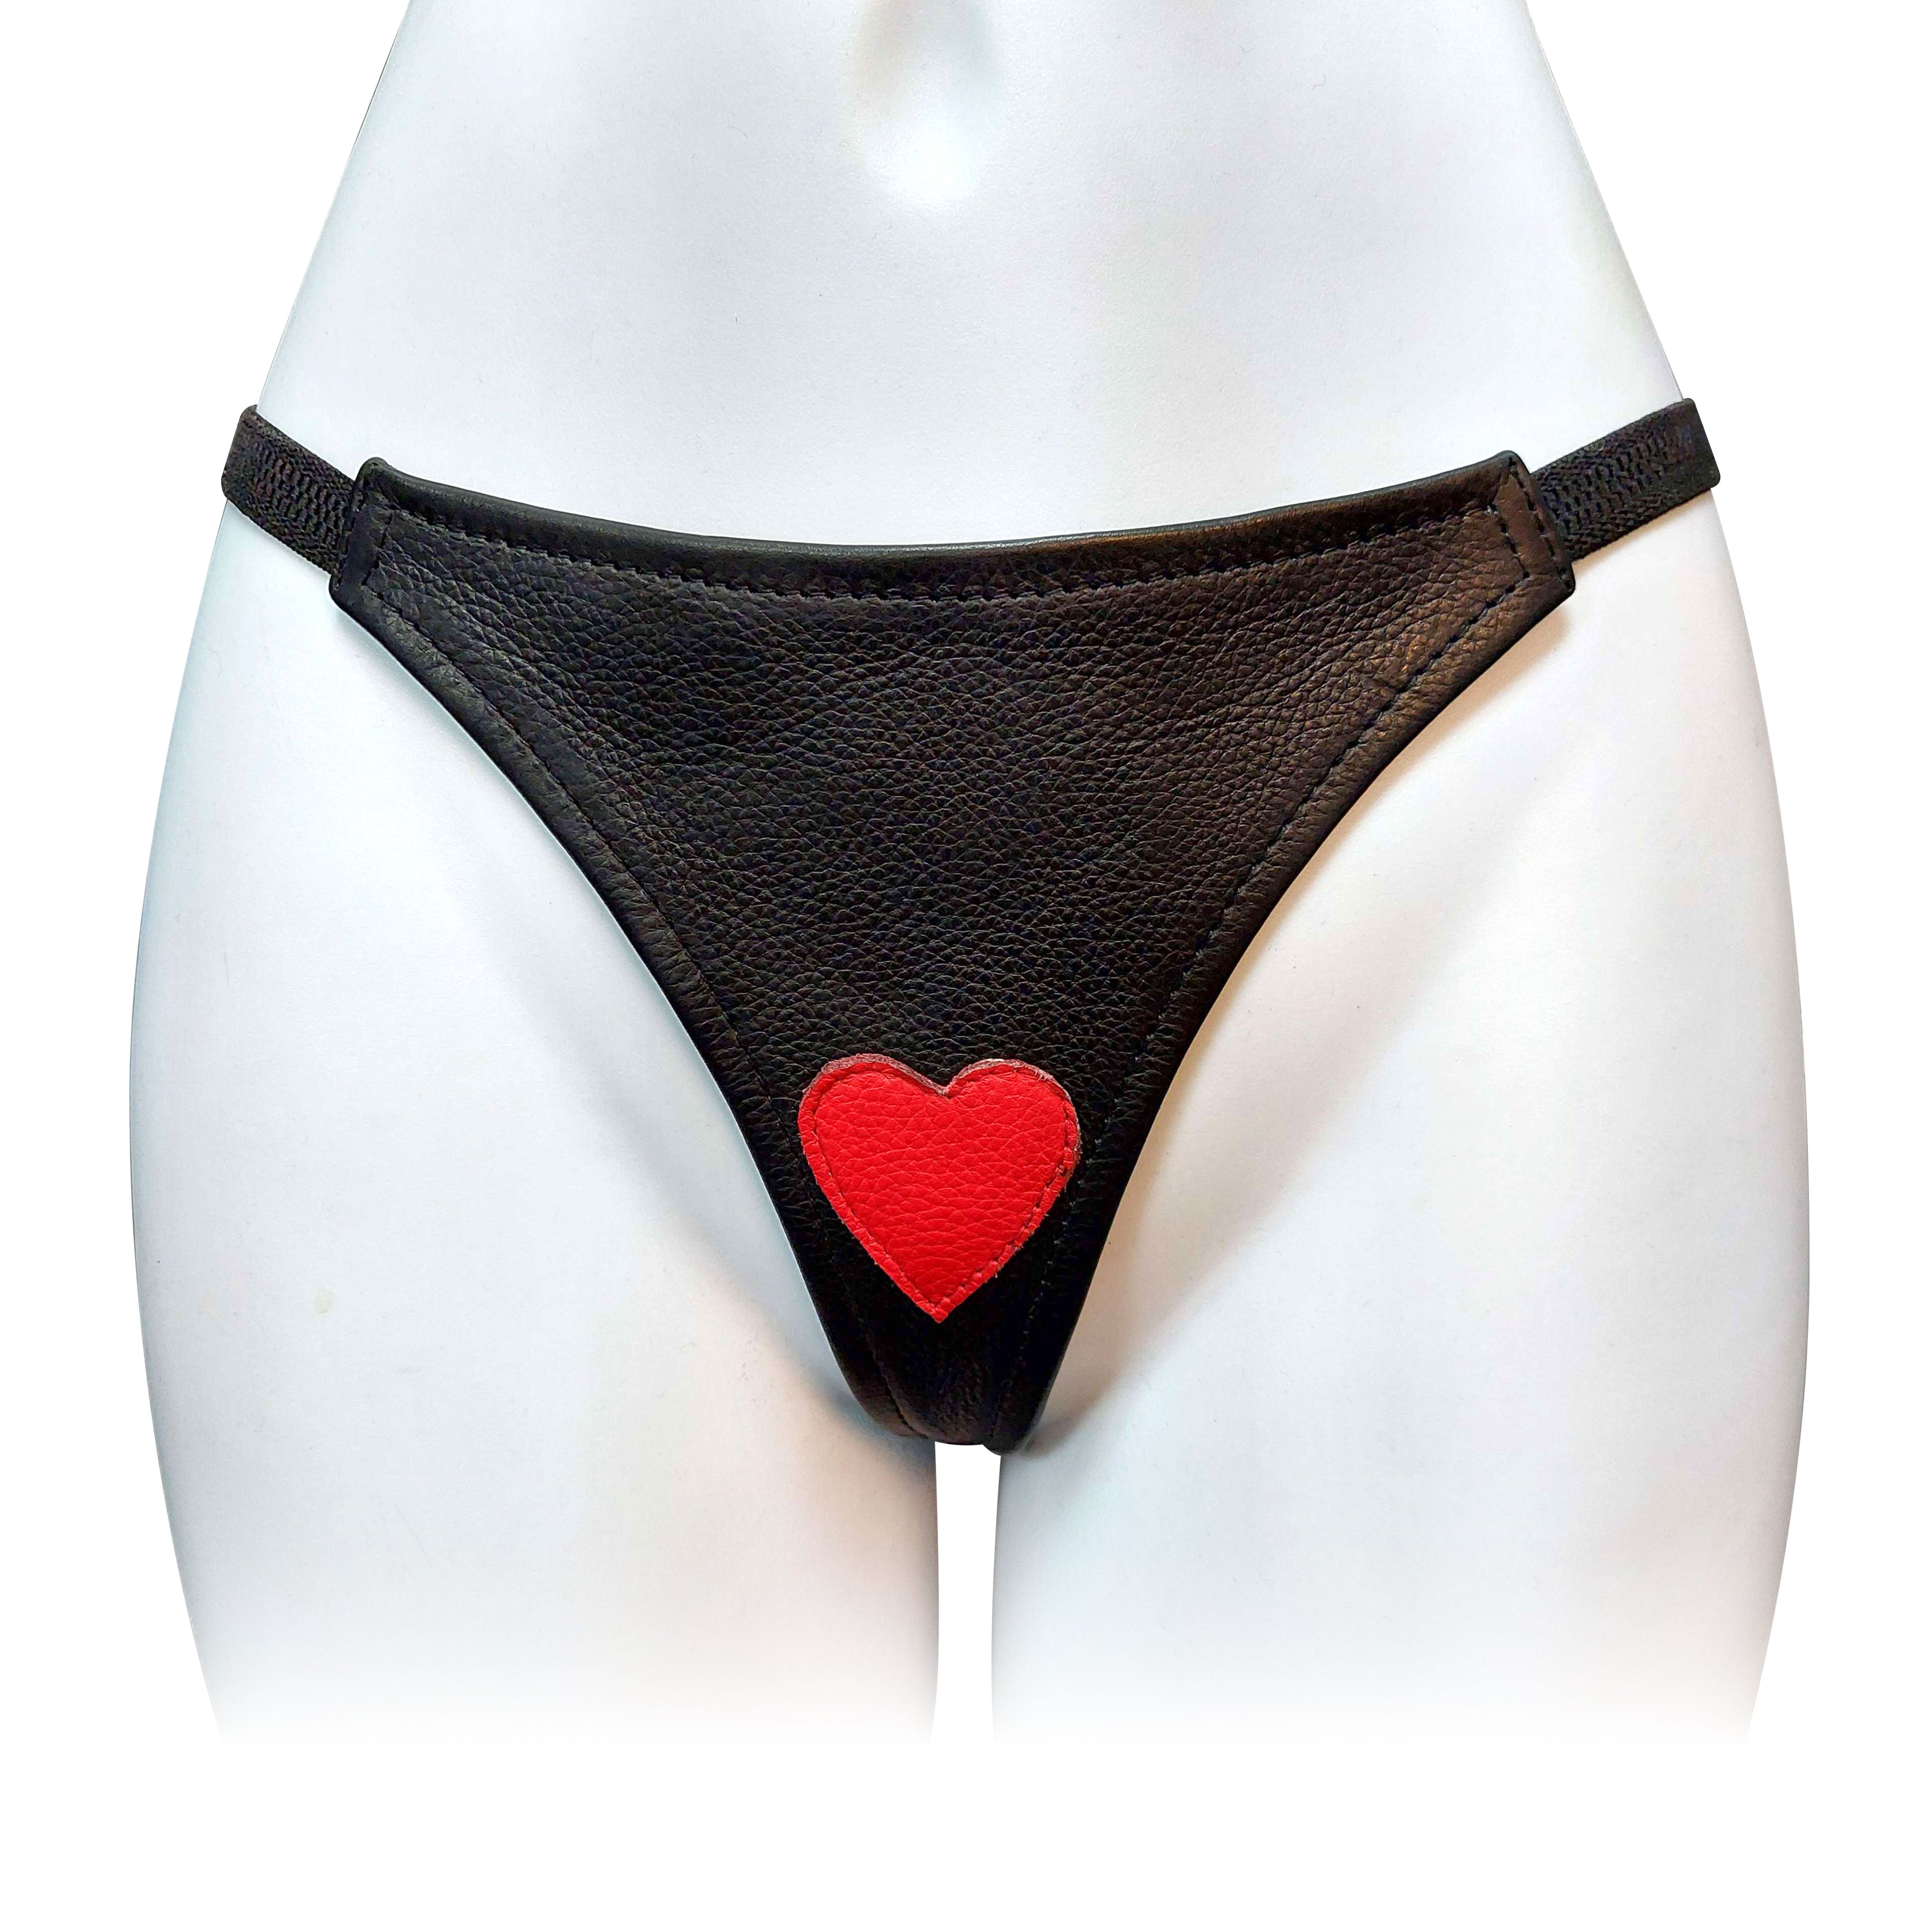 Heart Insert Leather Front G-string Black & Red O/S